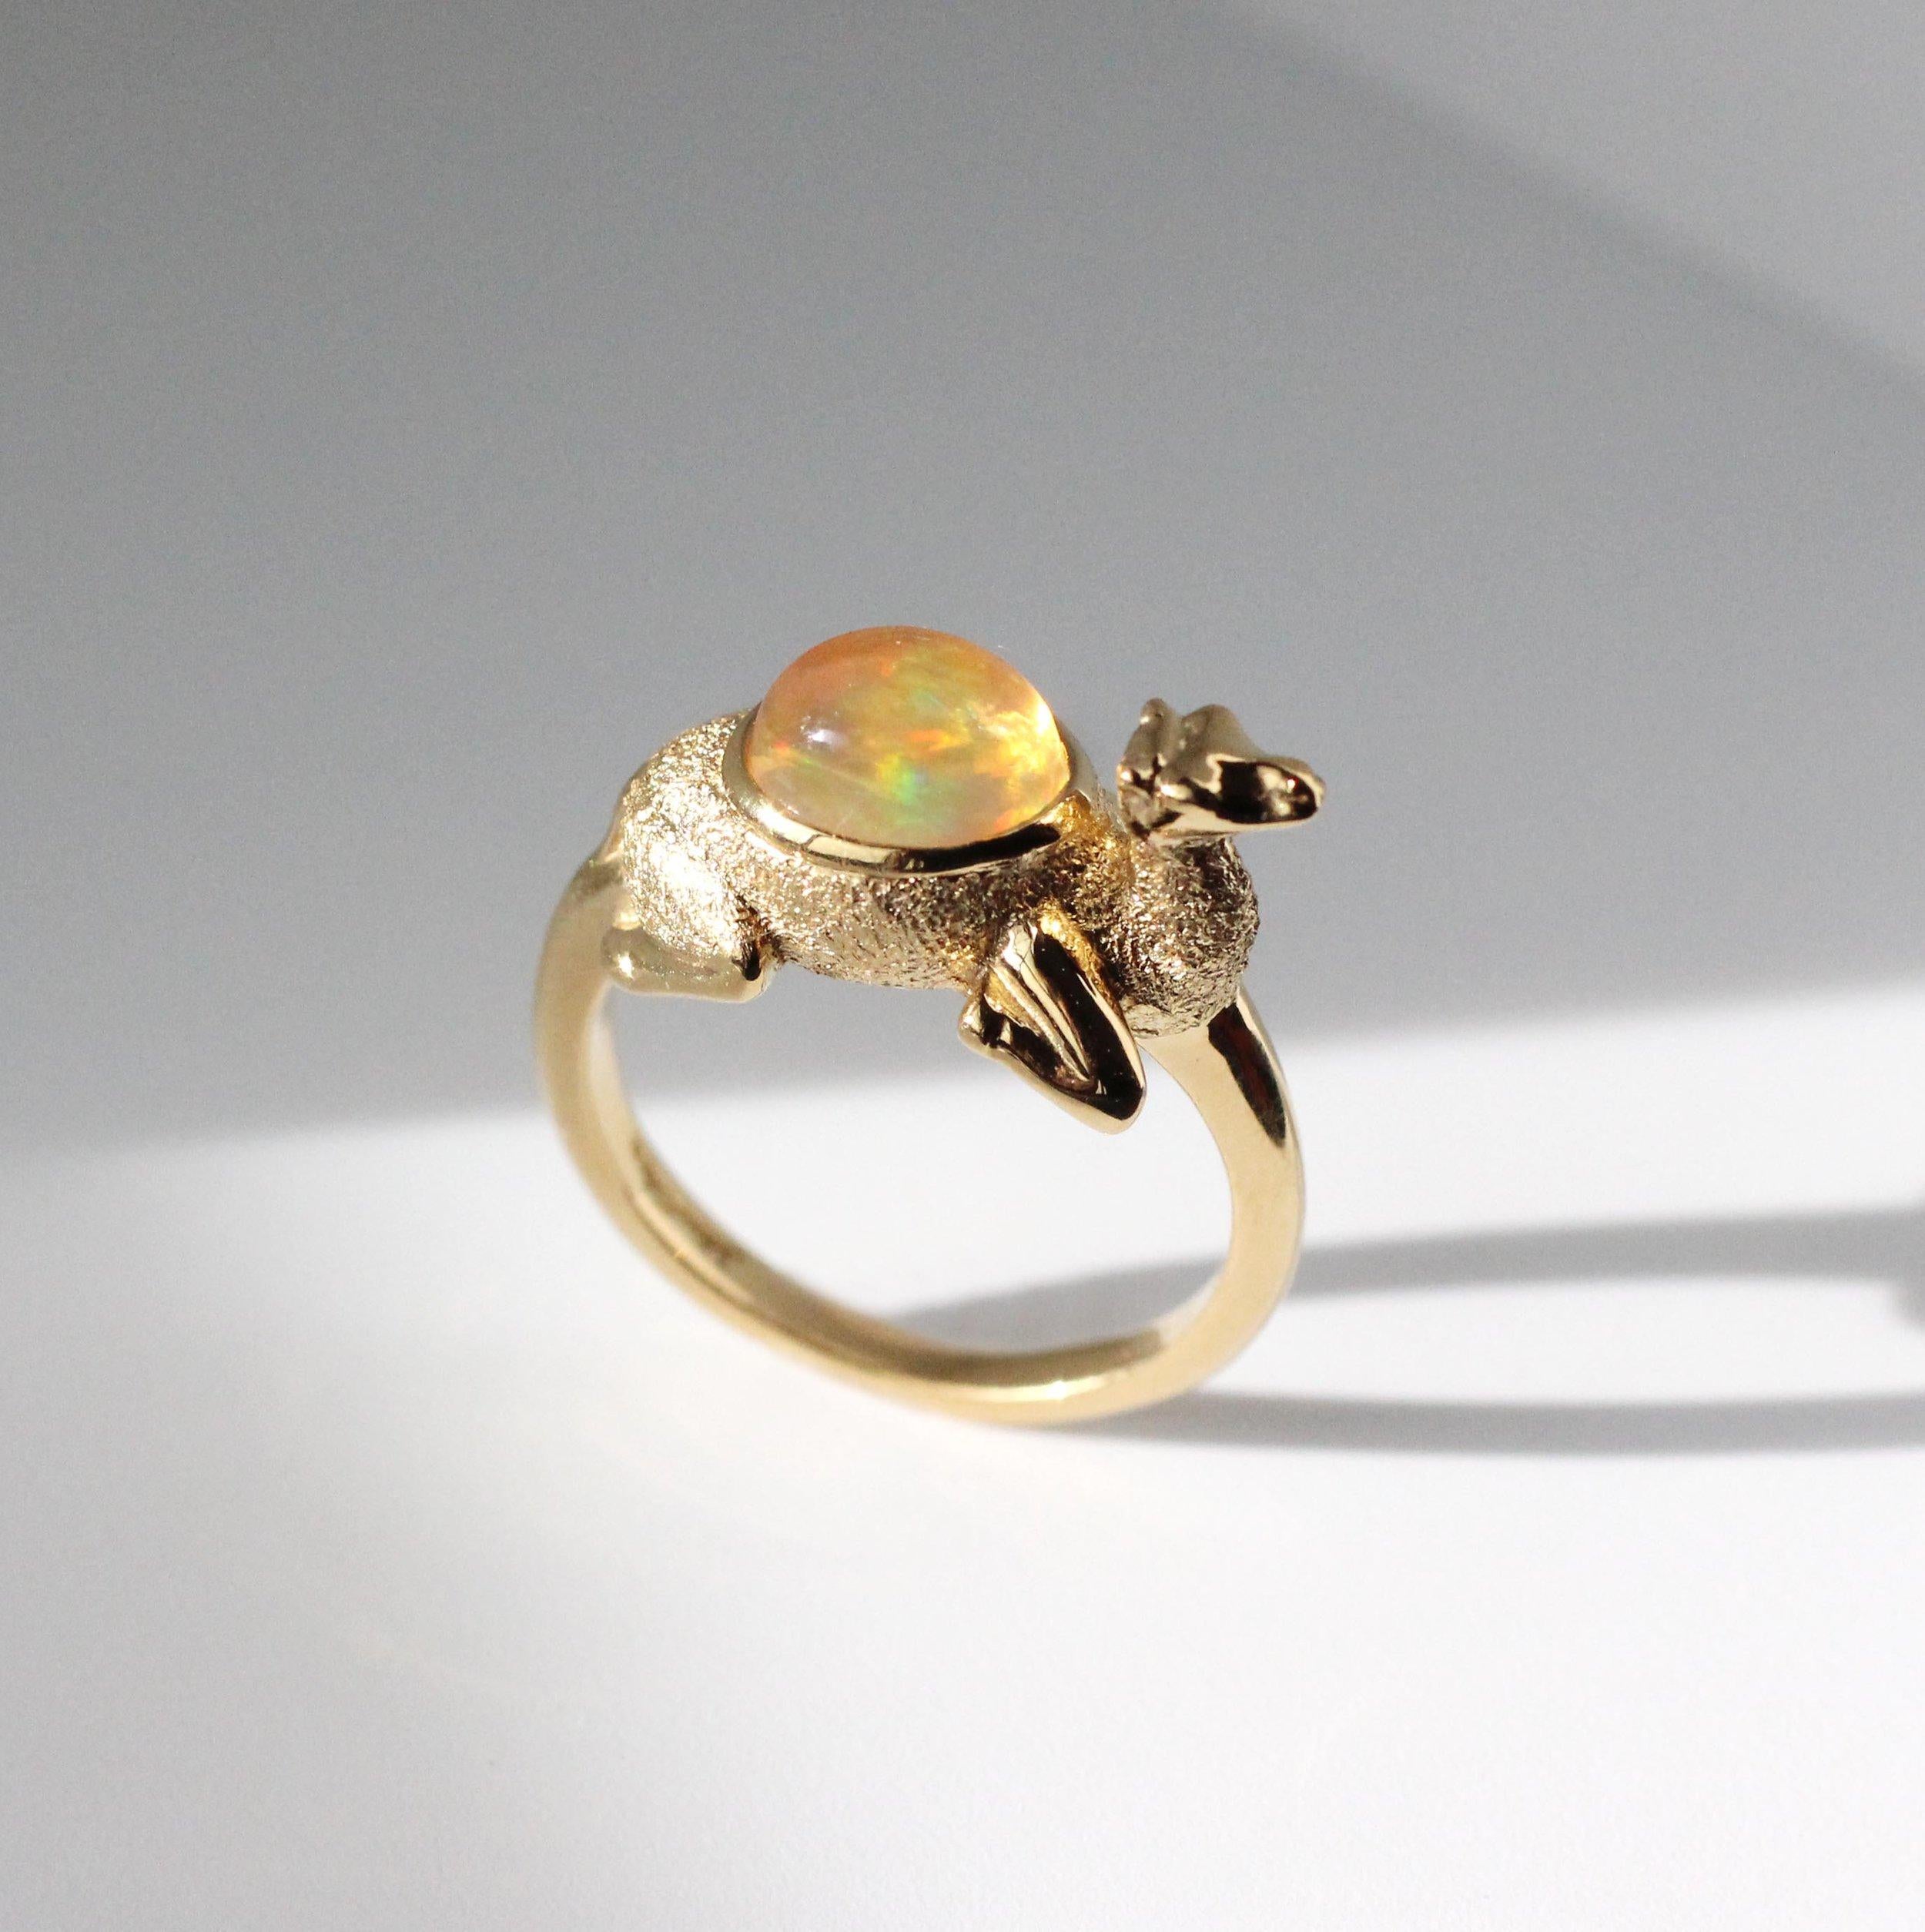 Mexican Fire Opal Ring in 22 Kt Gold

Containing one 1.11 Ct. Fire Opal Cabochon, for the passionate ones…

Opal is the Birthstone for October.

In-Stock Size 6 1/2 for immediate delivery.

This ring can be sized to fit. Please allow 2 weeks for